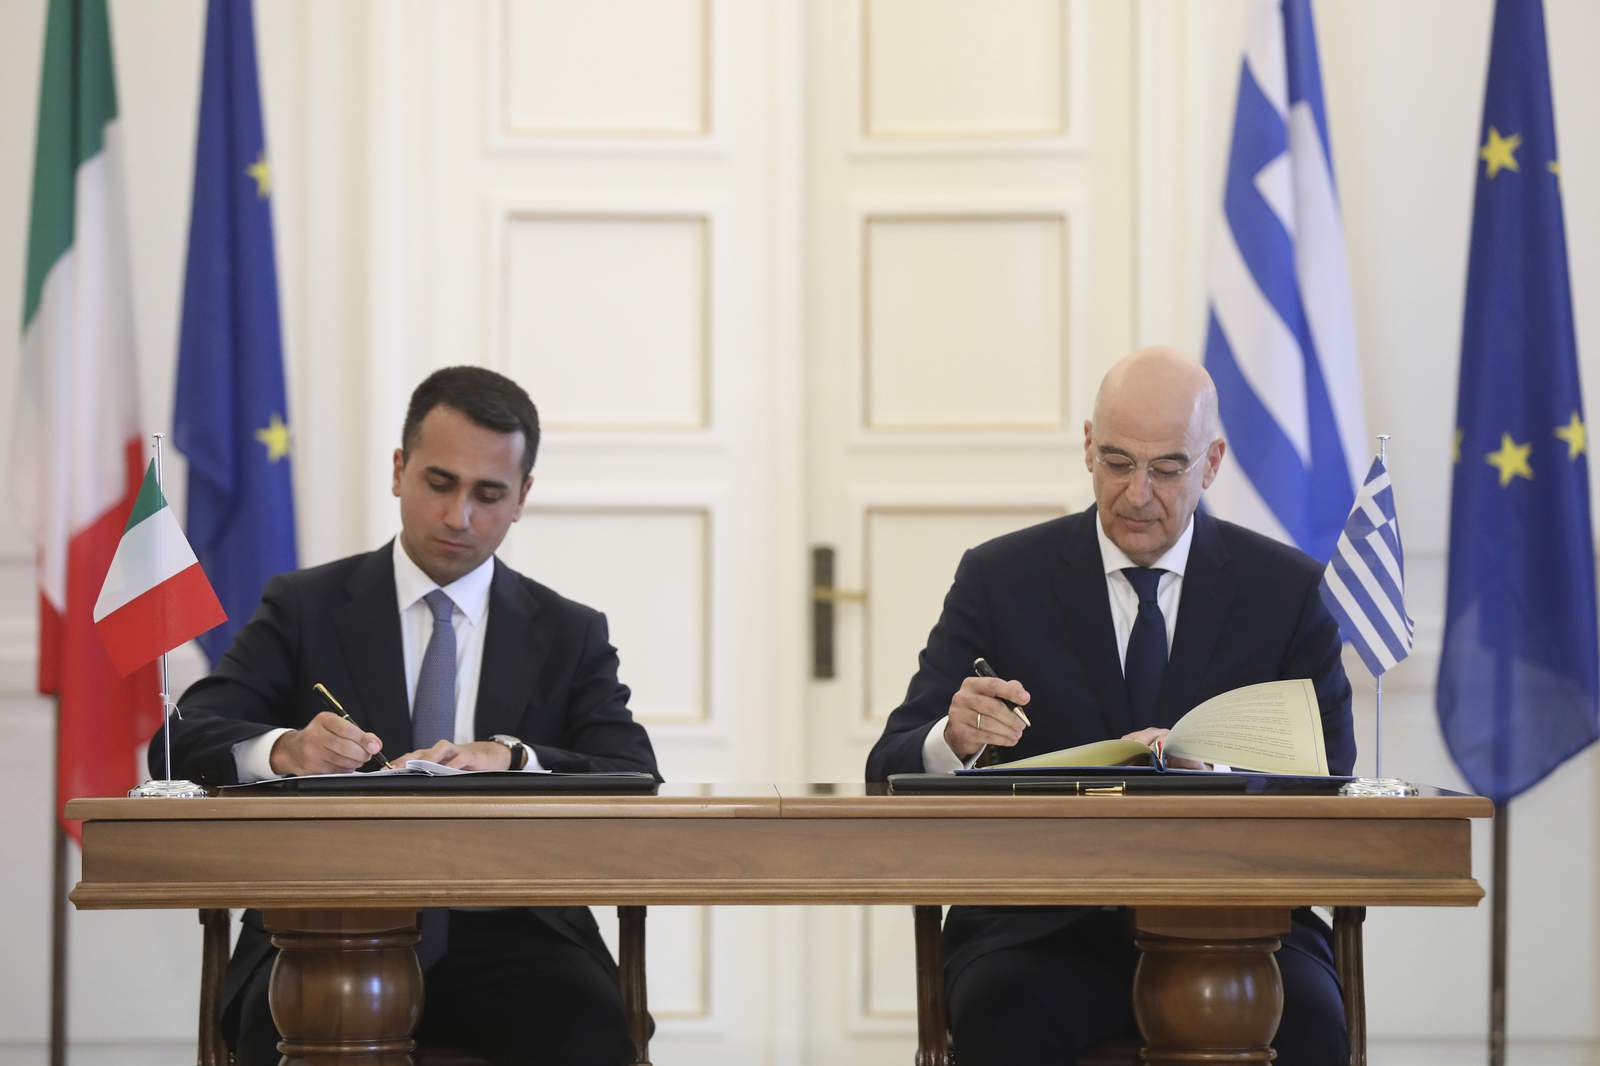 Greece, Italy sign deal on demarcating maritime boundaries